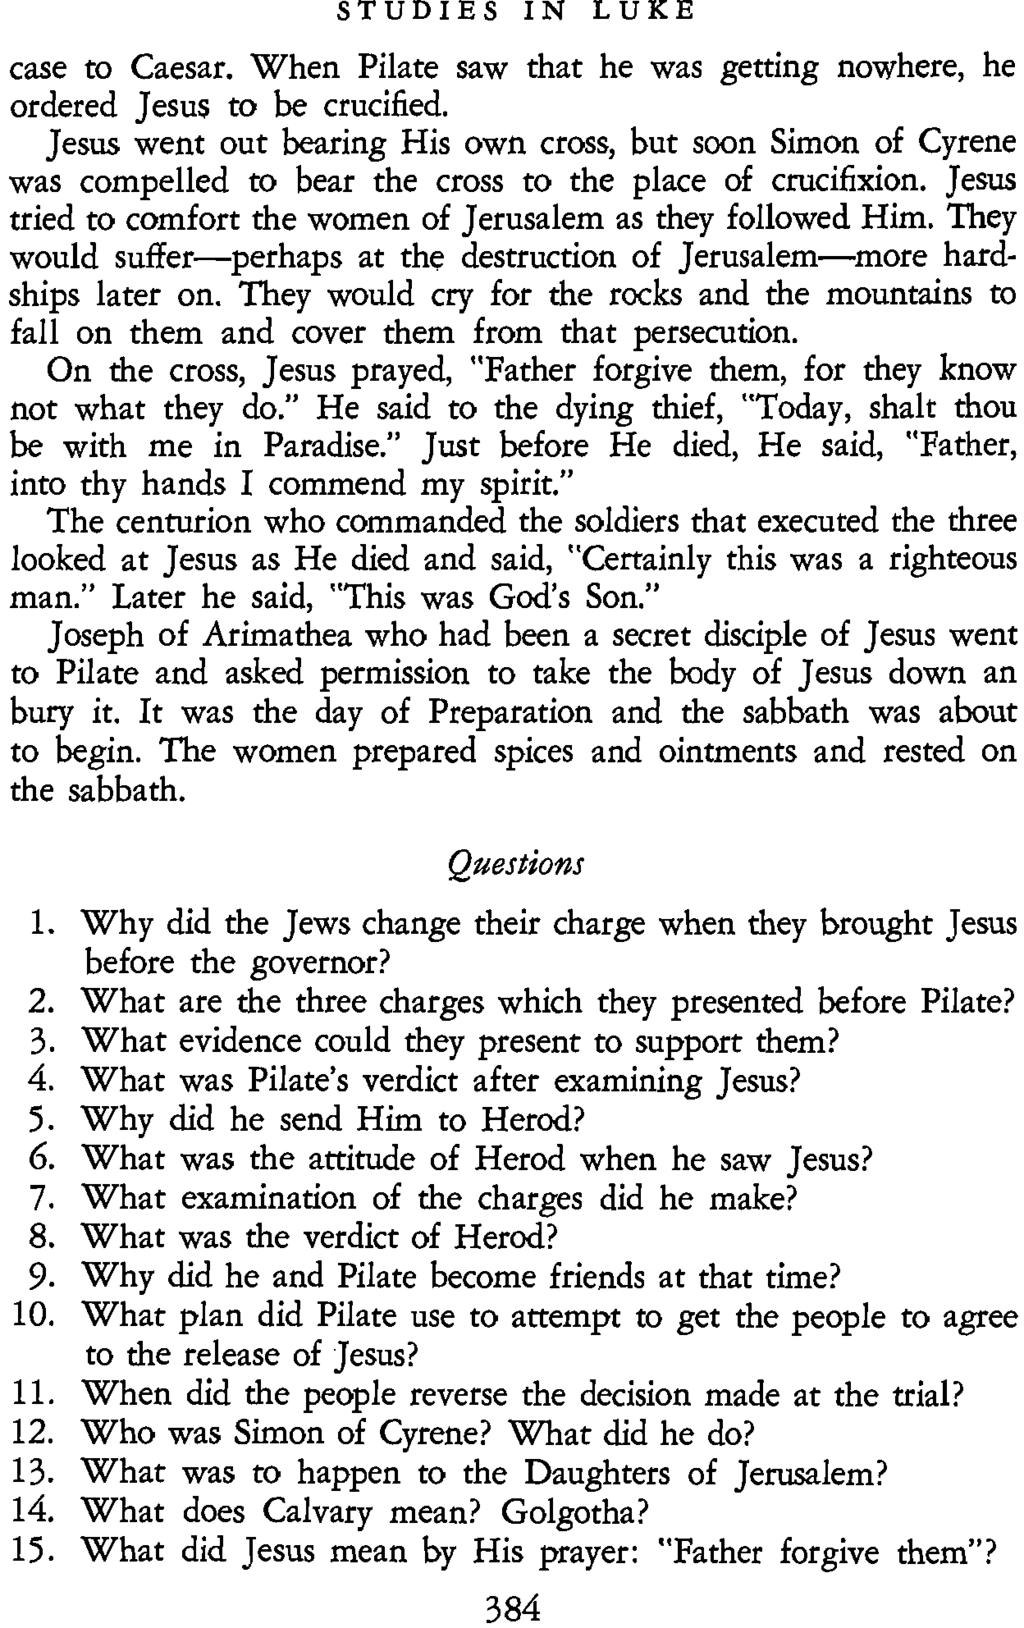 STUDIES IN LUKE case to Caesar. When Pilate saw that he was getting nowhere, he ordered Jesus to be crucified.